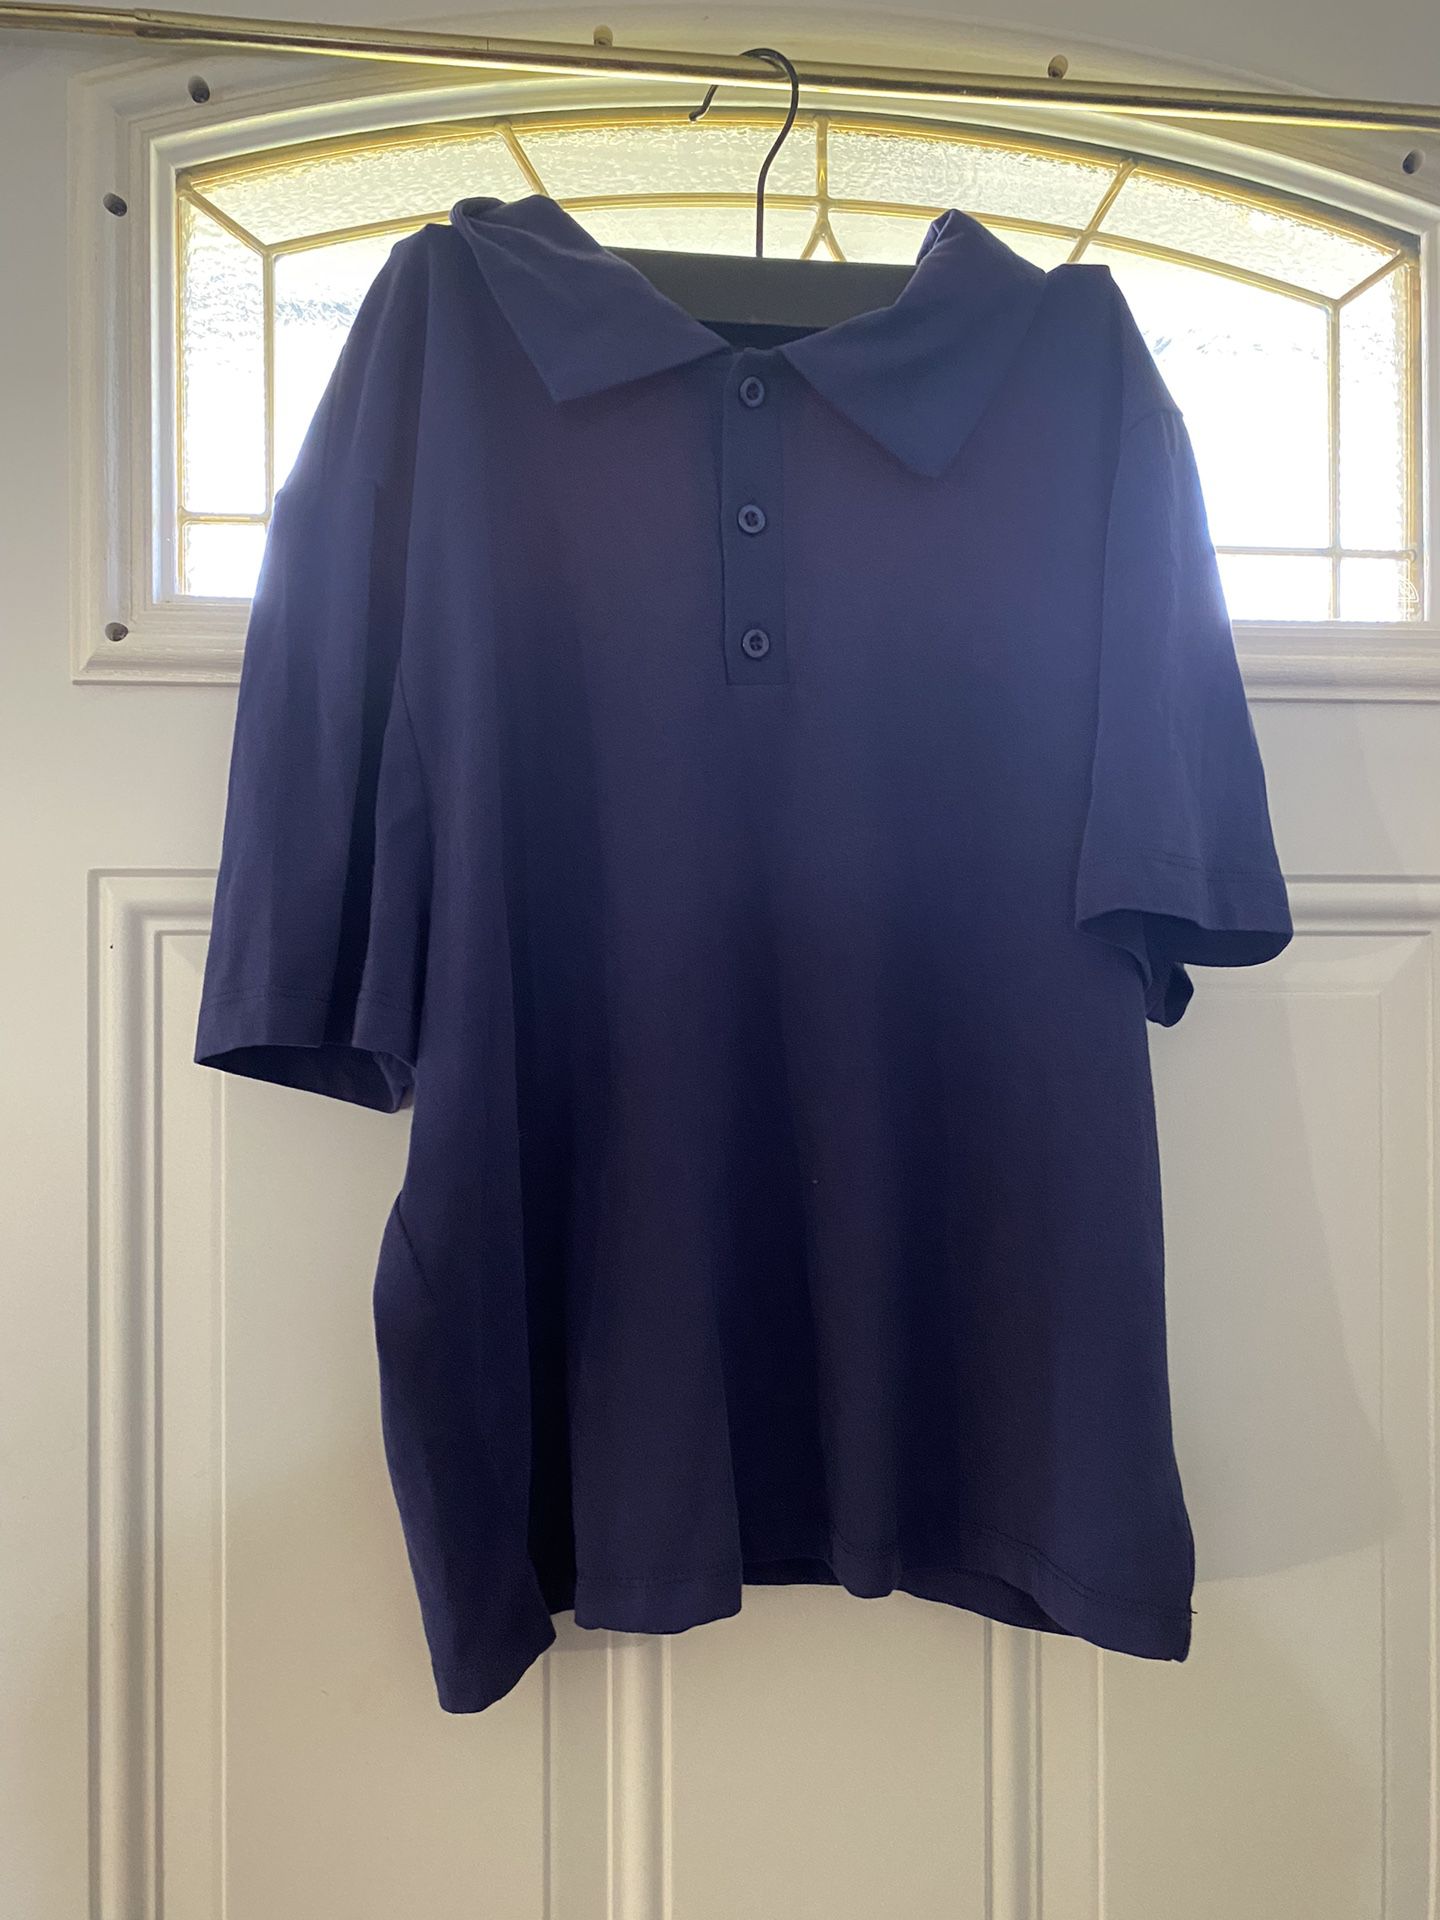 Blue Forever 21 Size 1XL Polo Shirt